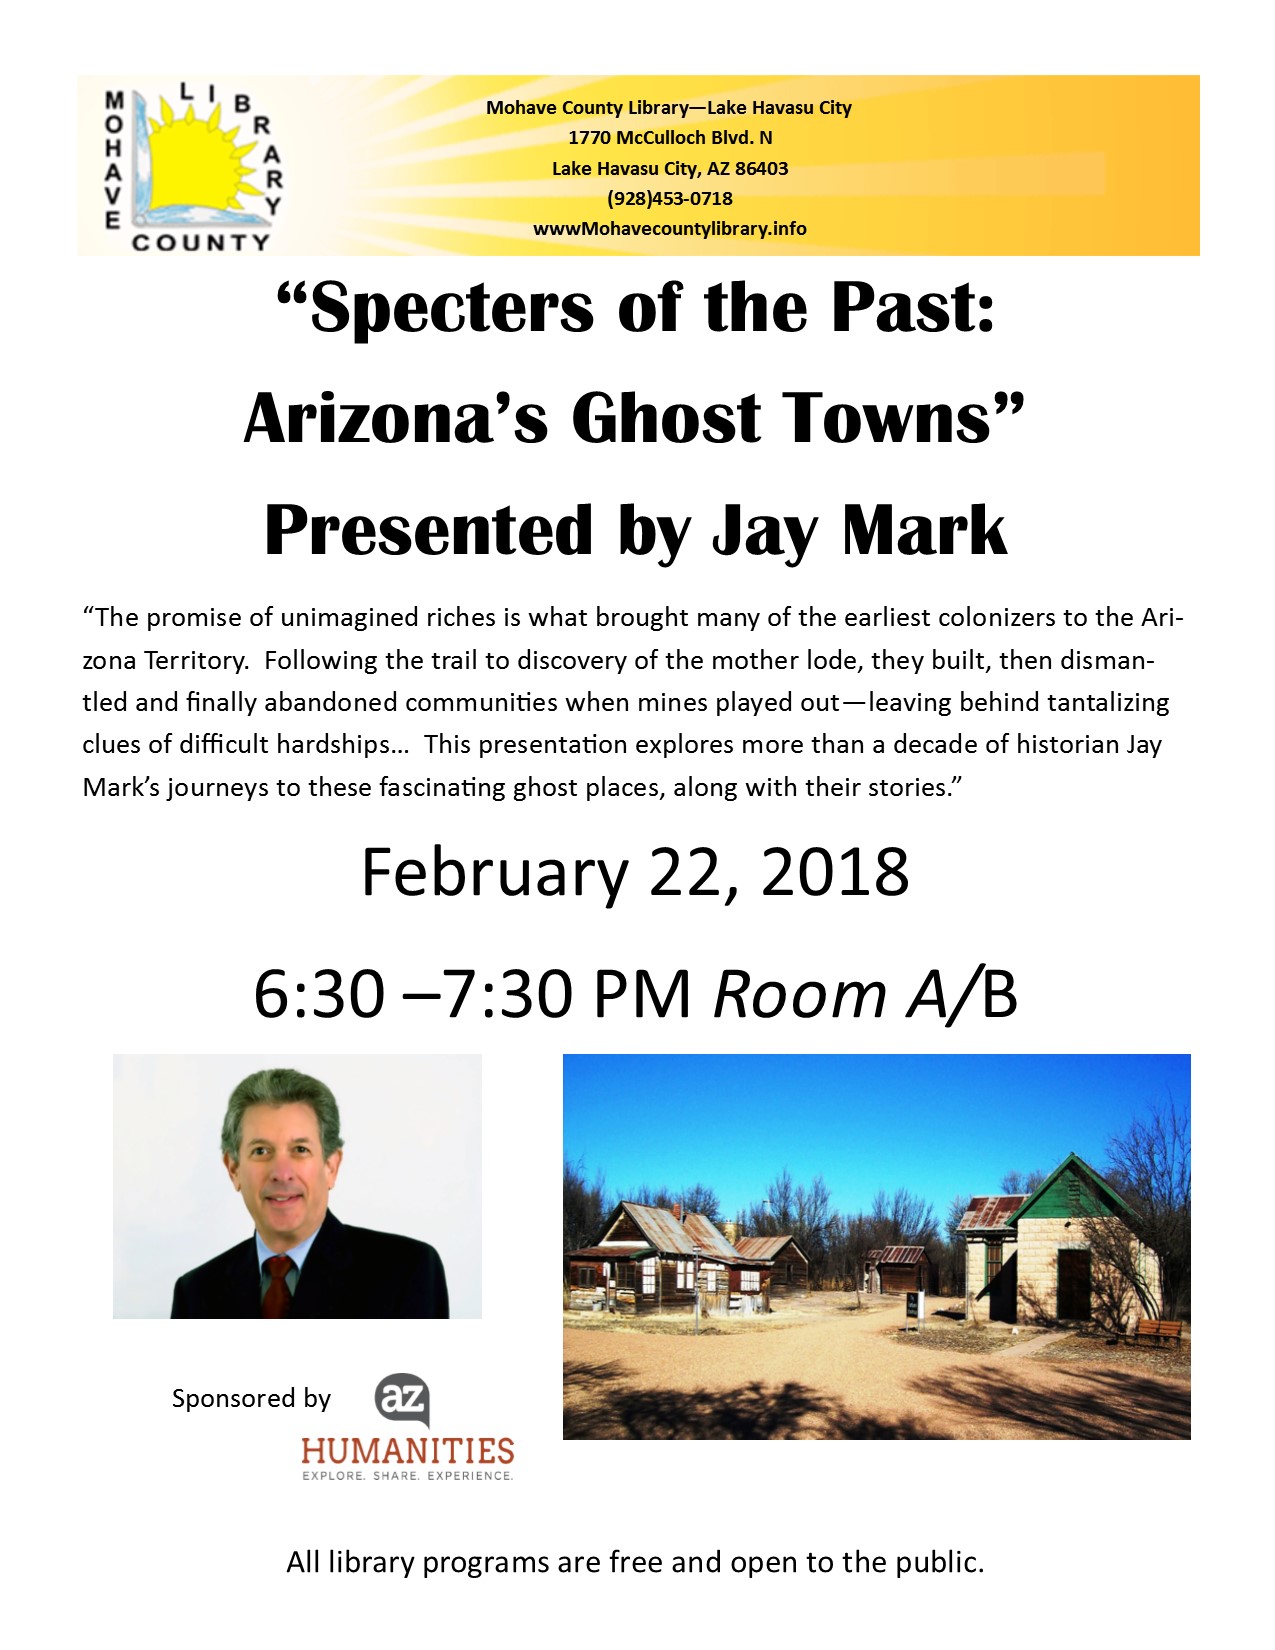 Specters of the Past: Arizona’s Ghost Towns